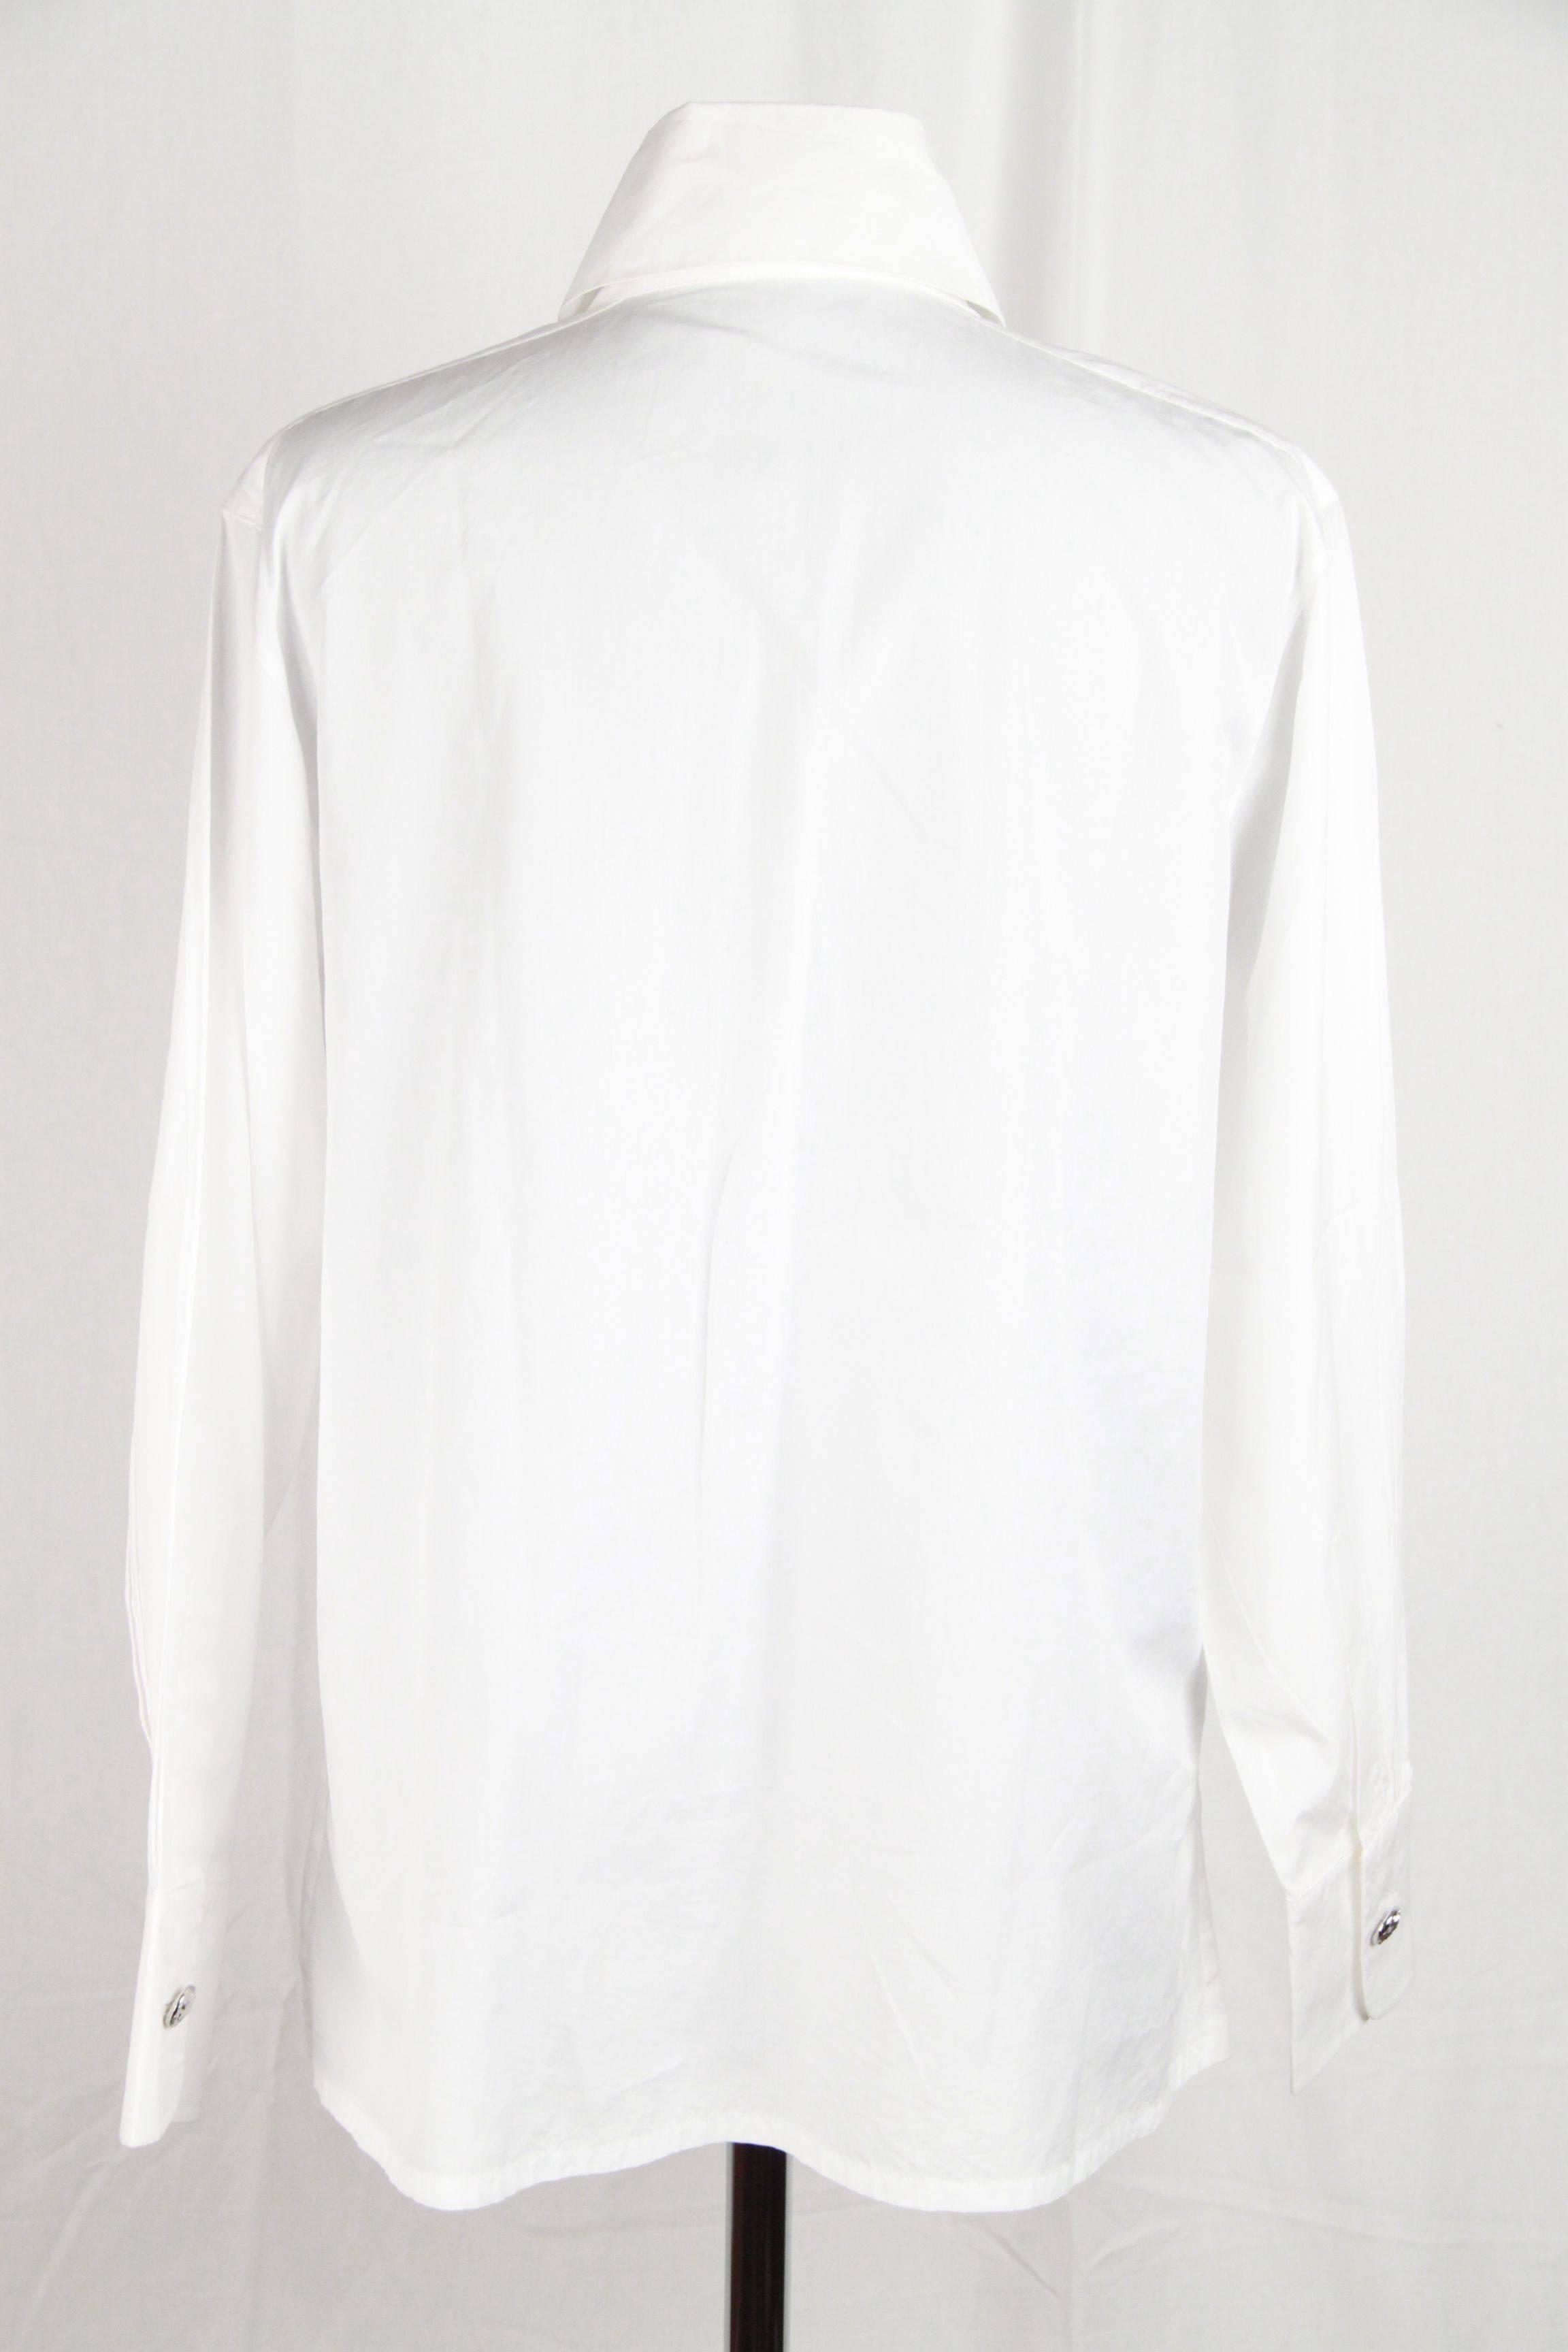 CHANEL White Cotton BUTTON DOWN SHIRT w/ Patch Pockets SIZE 34 For Sale ...